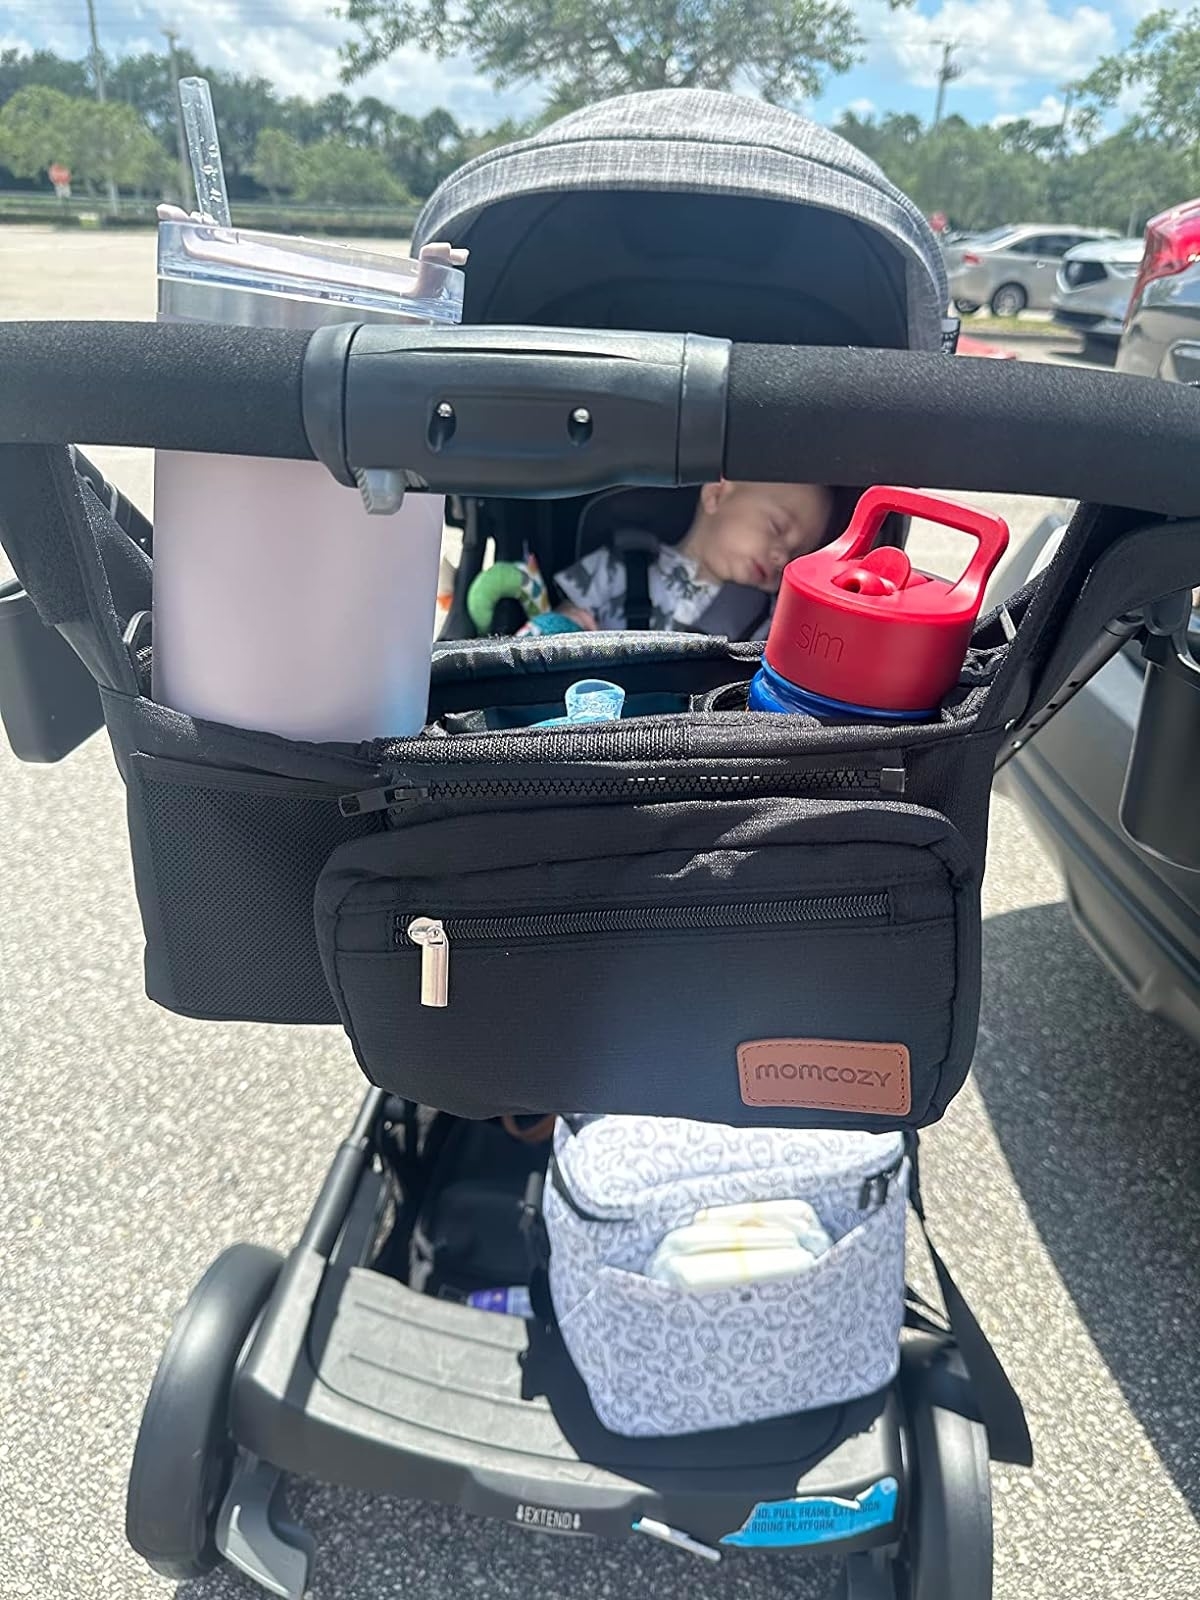 Baby asleep in a stroller with an organizer holding a bottle and a drink. A bag and a burp cloth are underneath